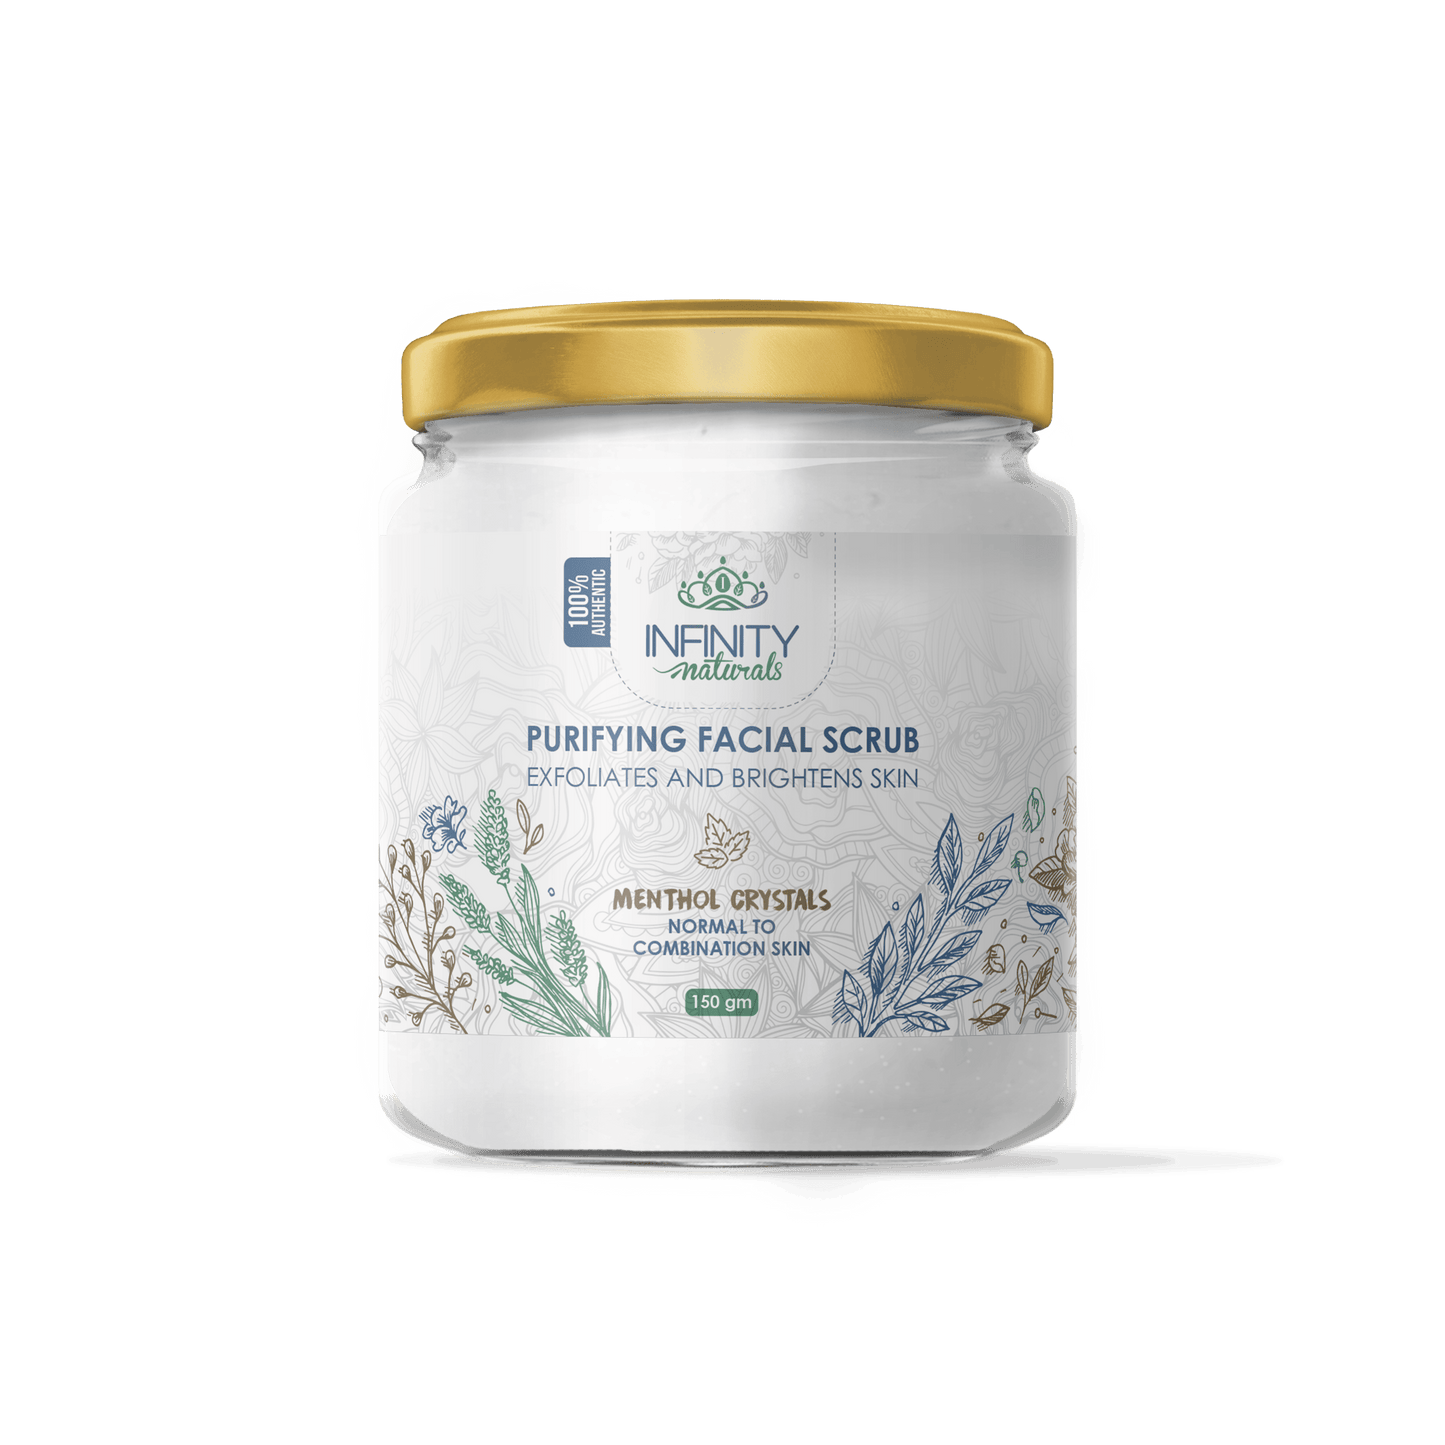 Infinity Naturals Purifying Facial Scrub Menthol Crystals ( Normal to Combination Skin ) - Beauty Bounty